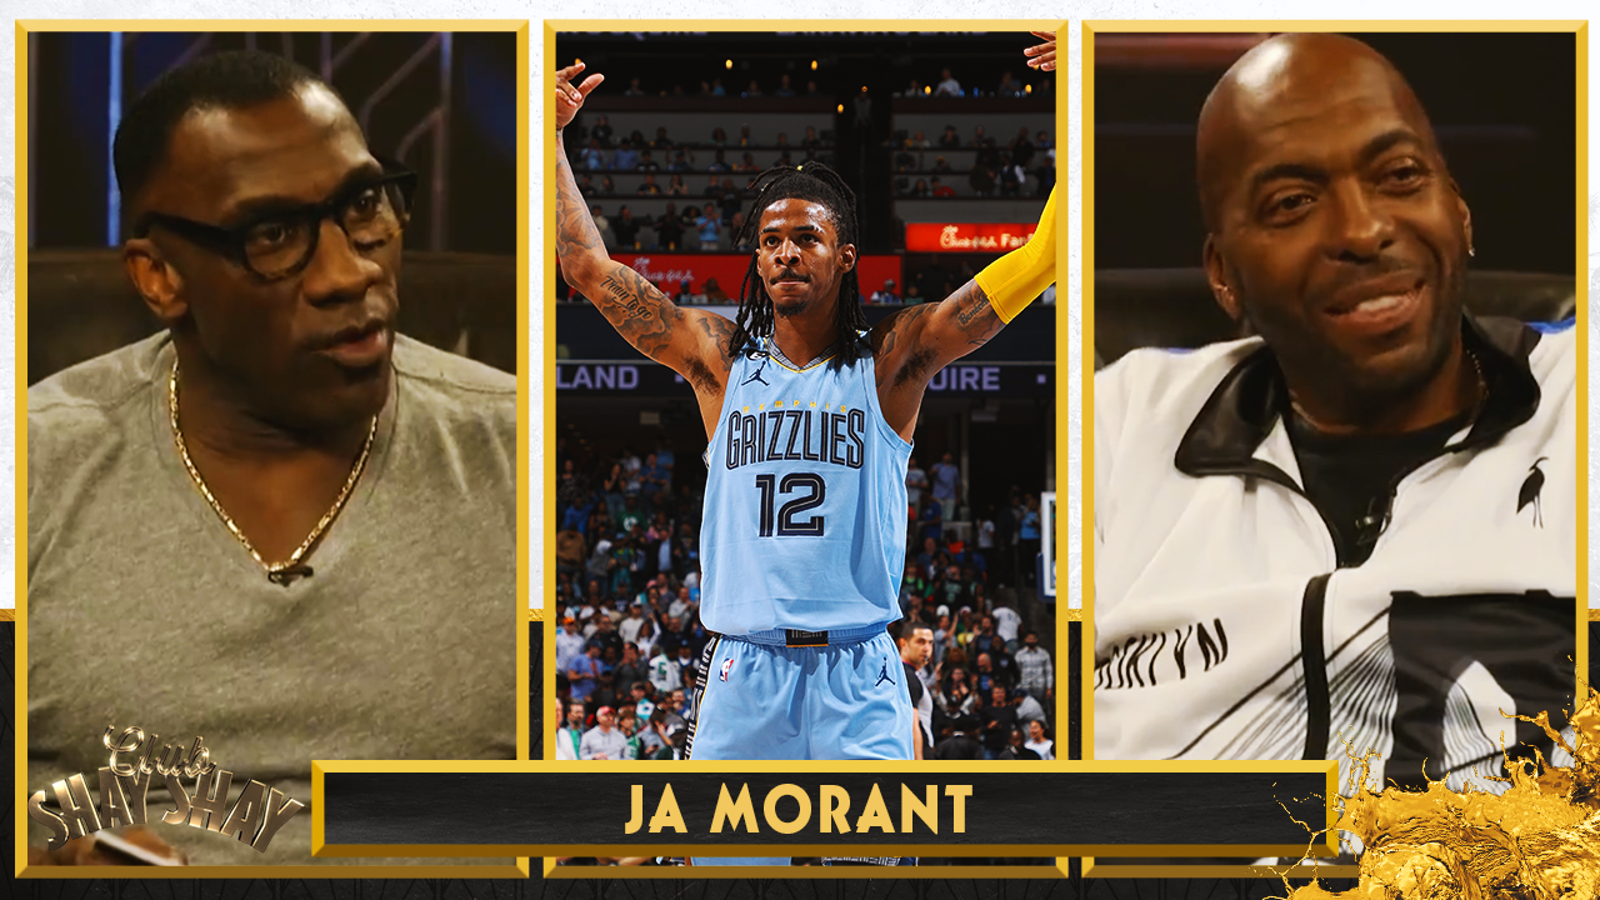 Ja Morant is the face of the NBA in 2020s, according to John Salley | CLUB SHAY SHAY